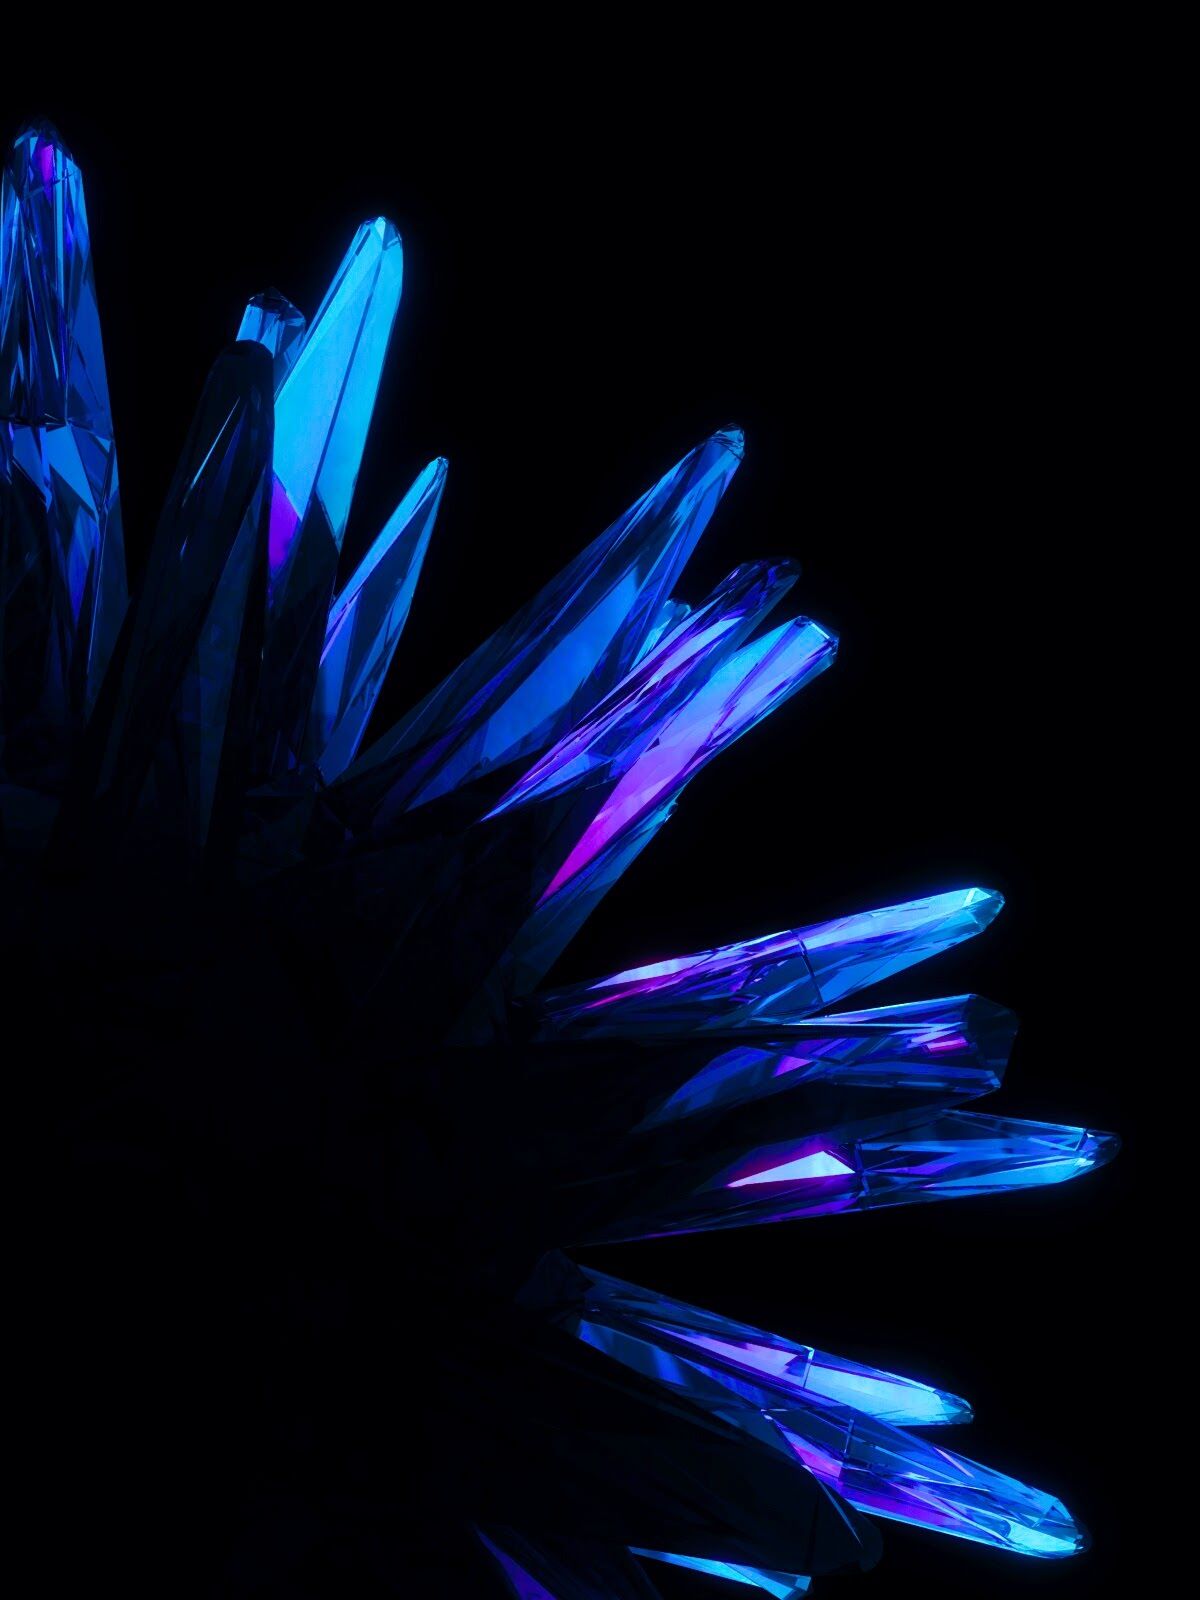 Awesome Black Wallpaper For iPhone X S Oled Screen And Purple Amoled